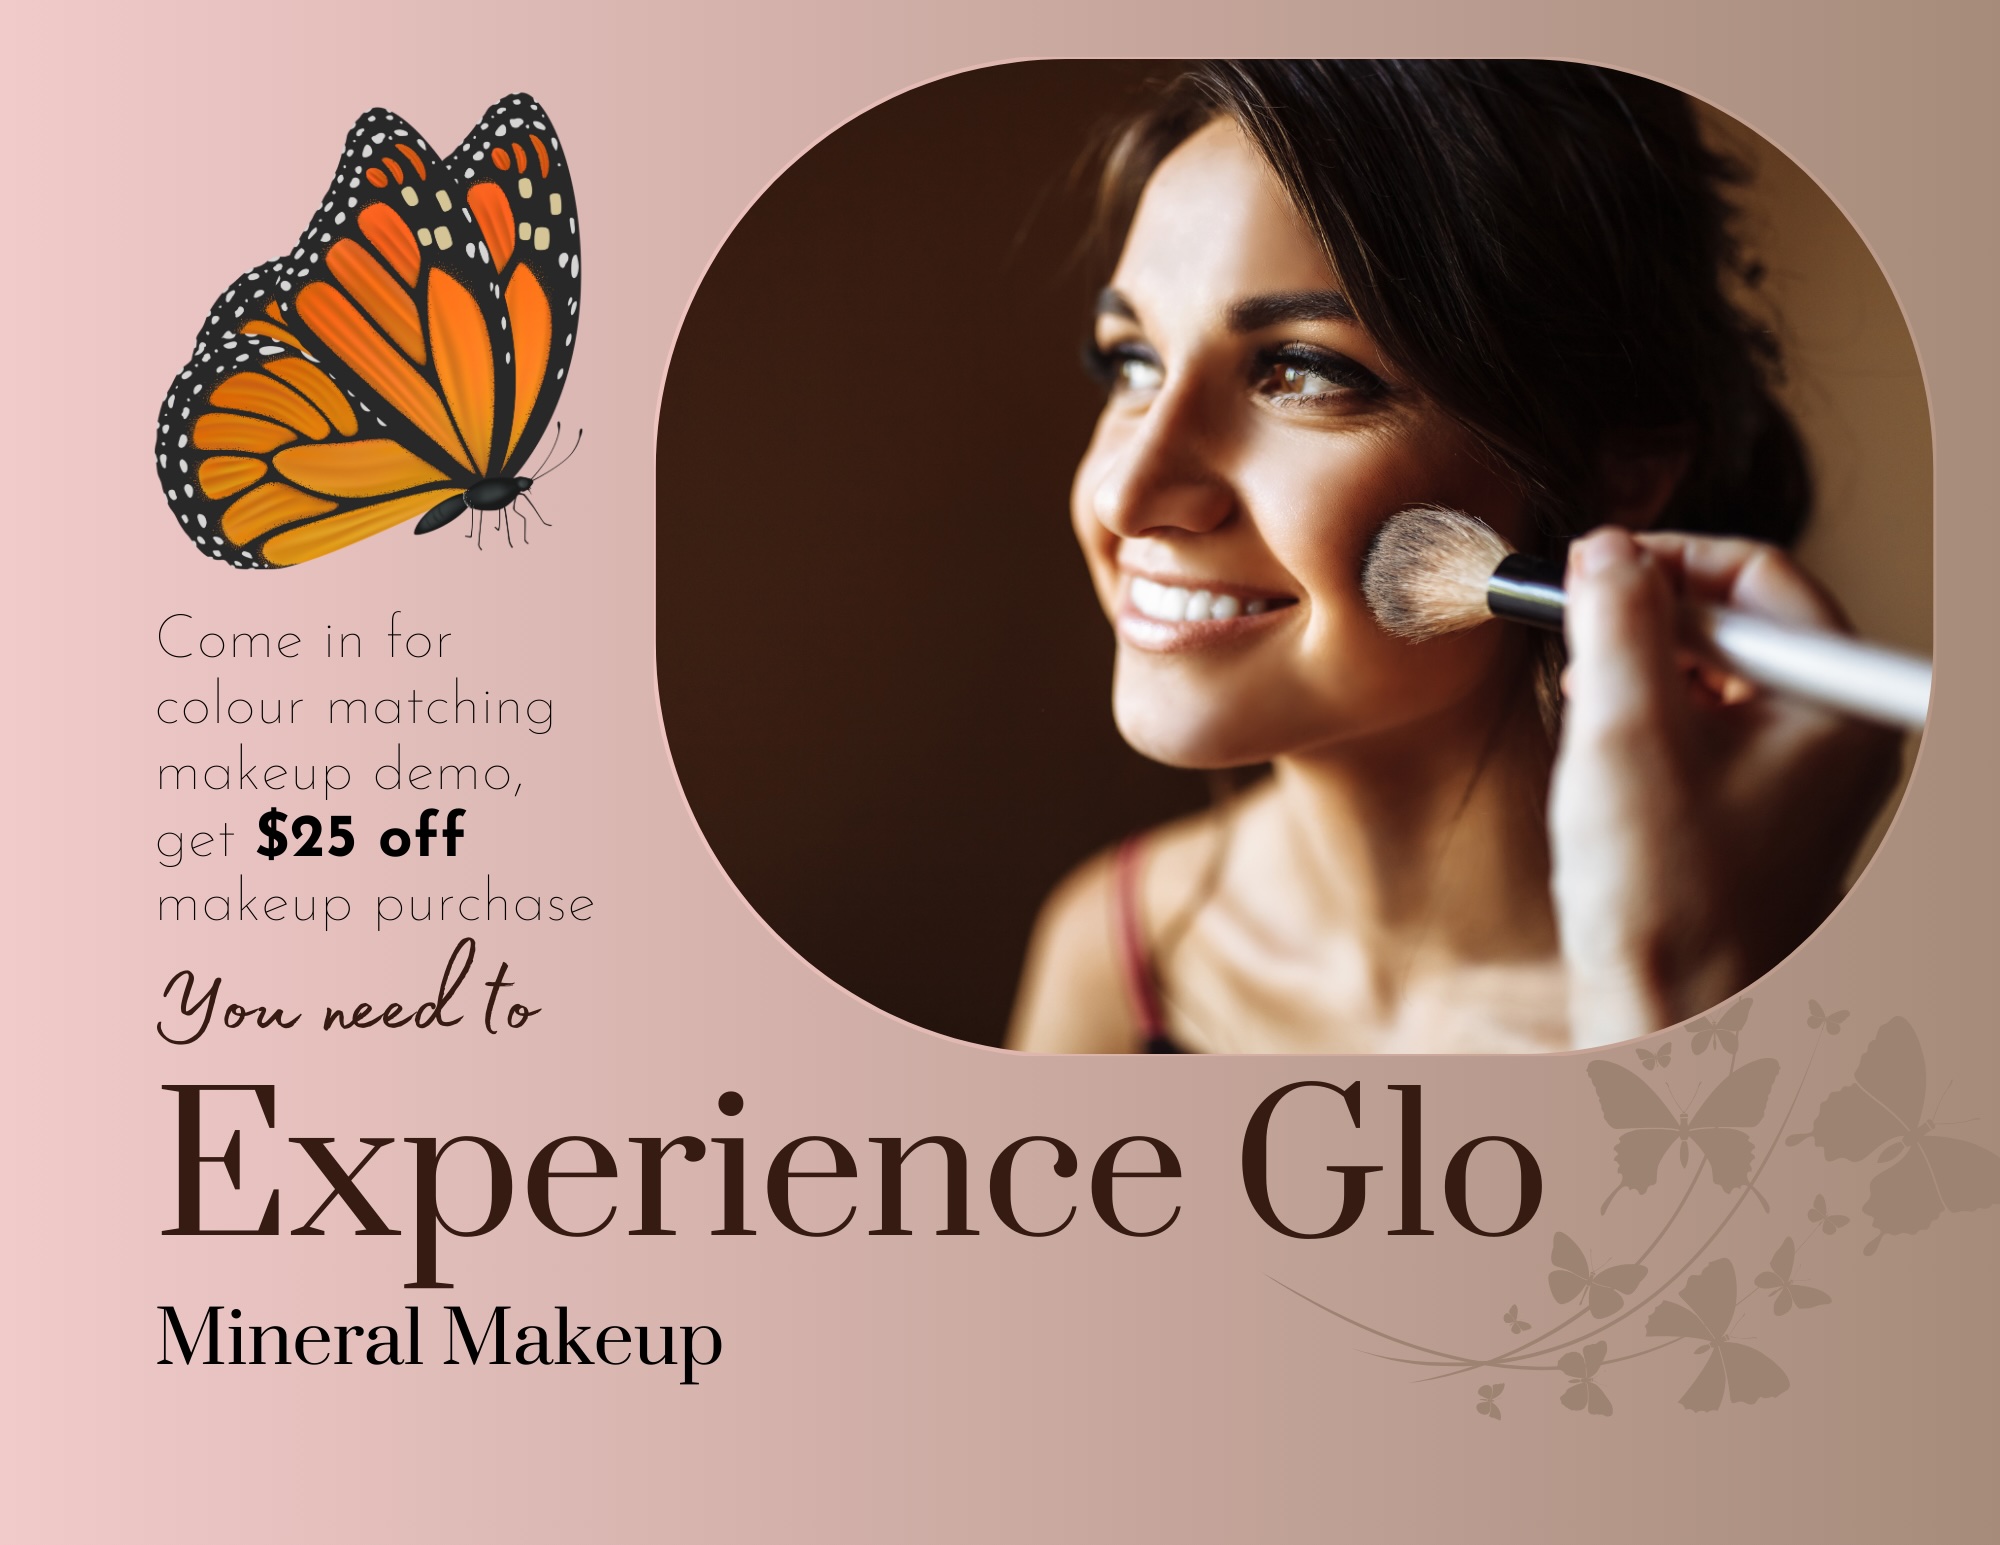 Come in for colour matching makeup demo, get $25 off makeup purchase. You need to Experience Glo Mineral Makeup!